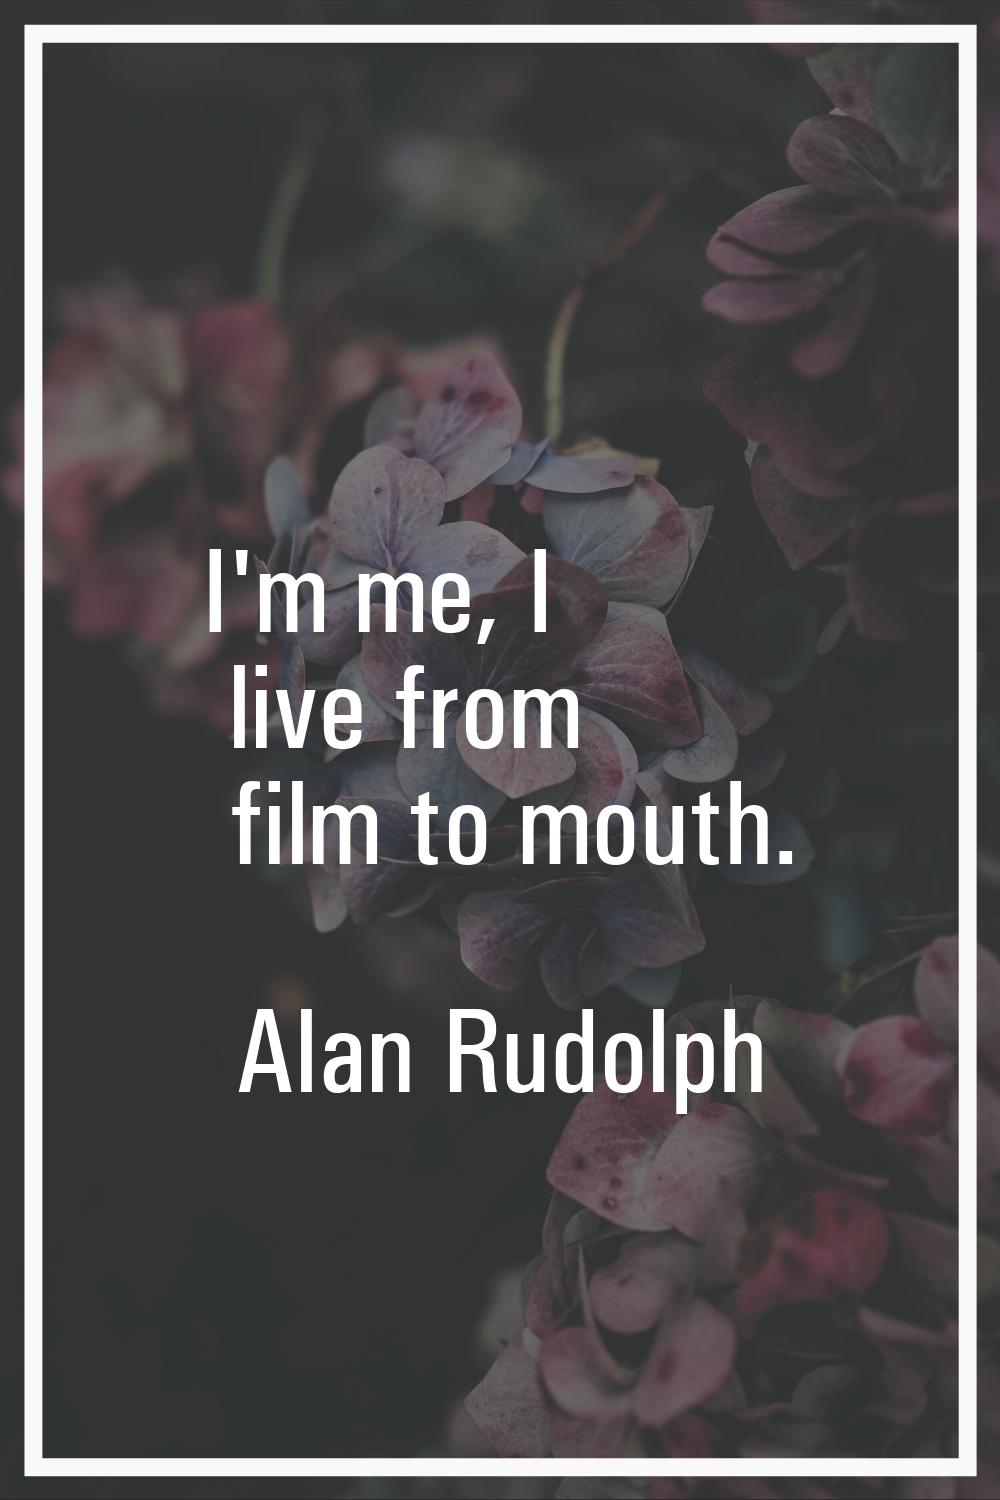 I'm me, I live from film to mouth.